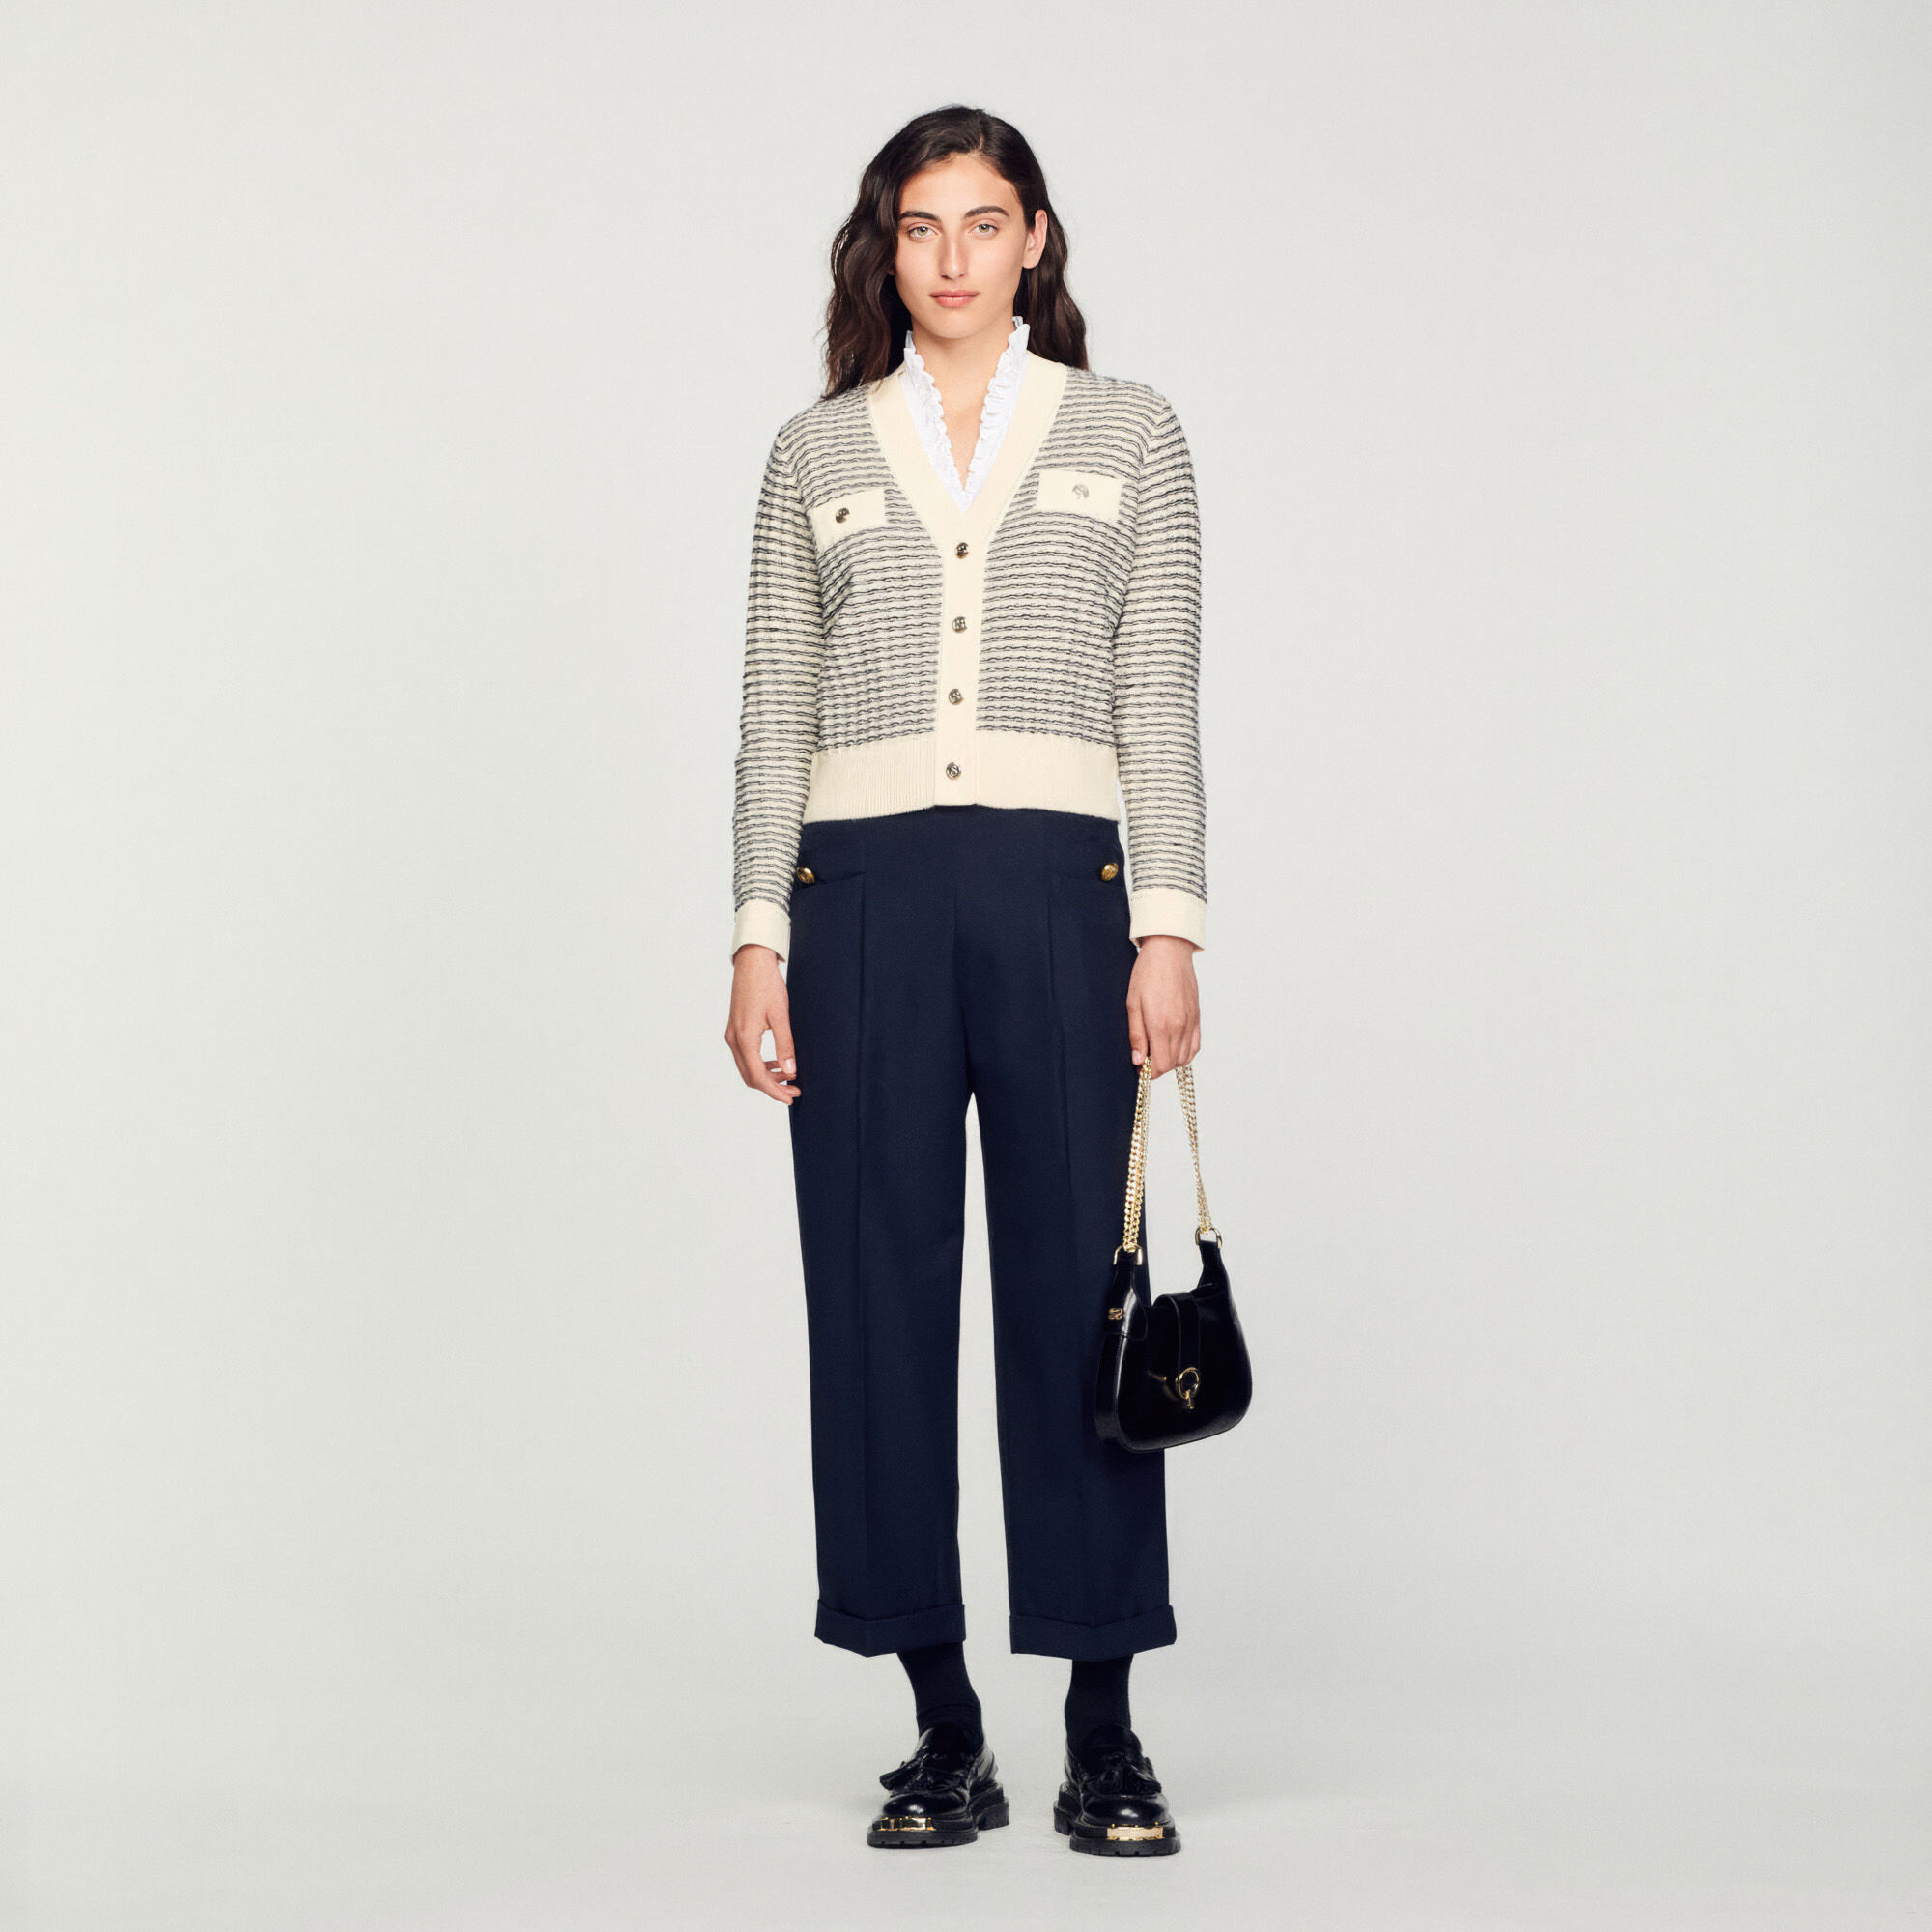 Murcie Two-tone cardigan with buttons - Sweaters & Cardigans